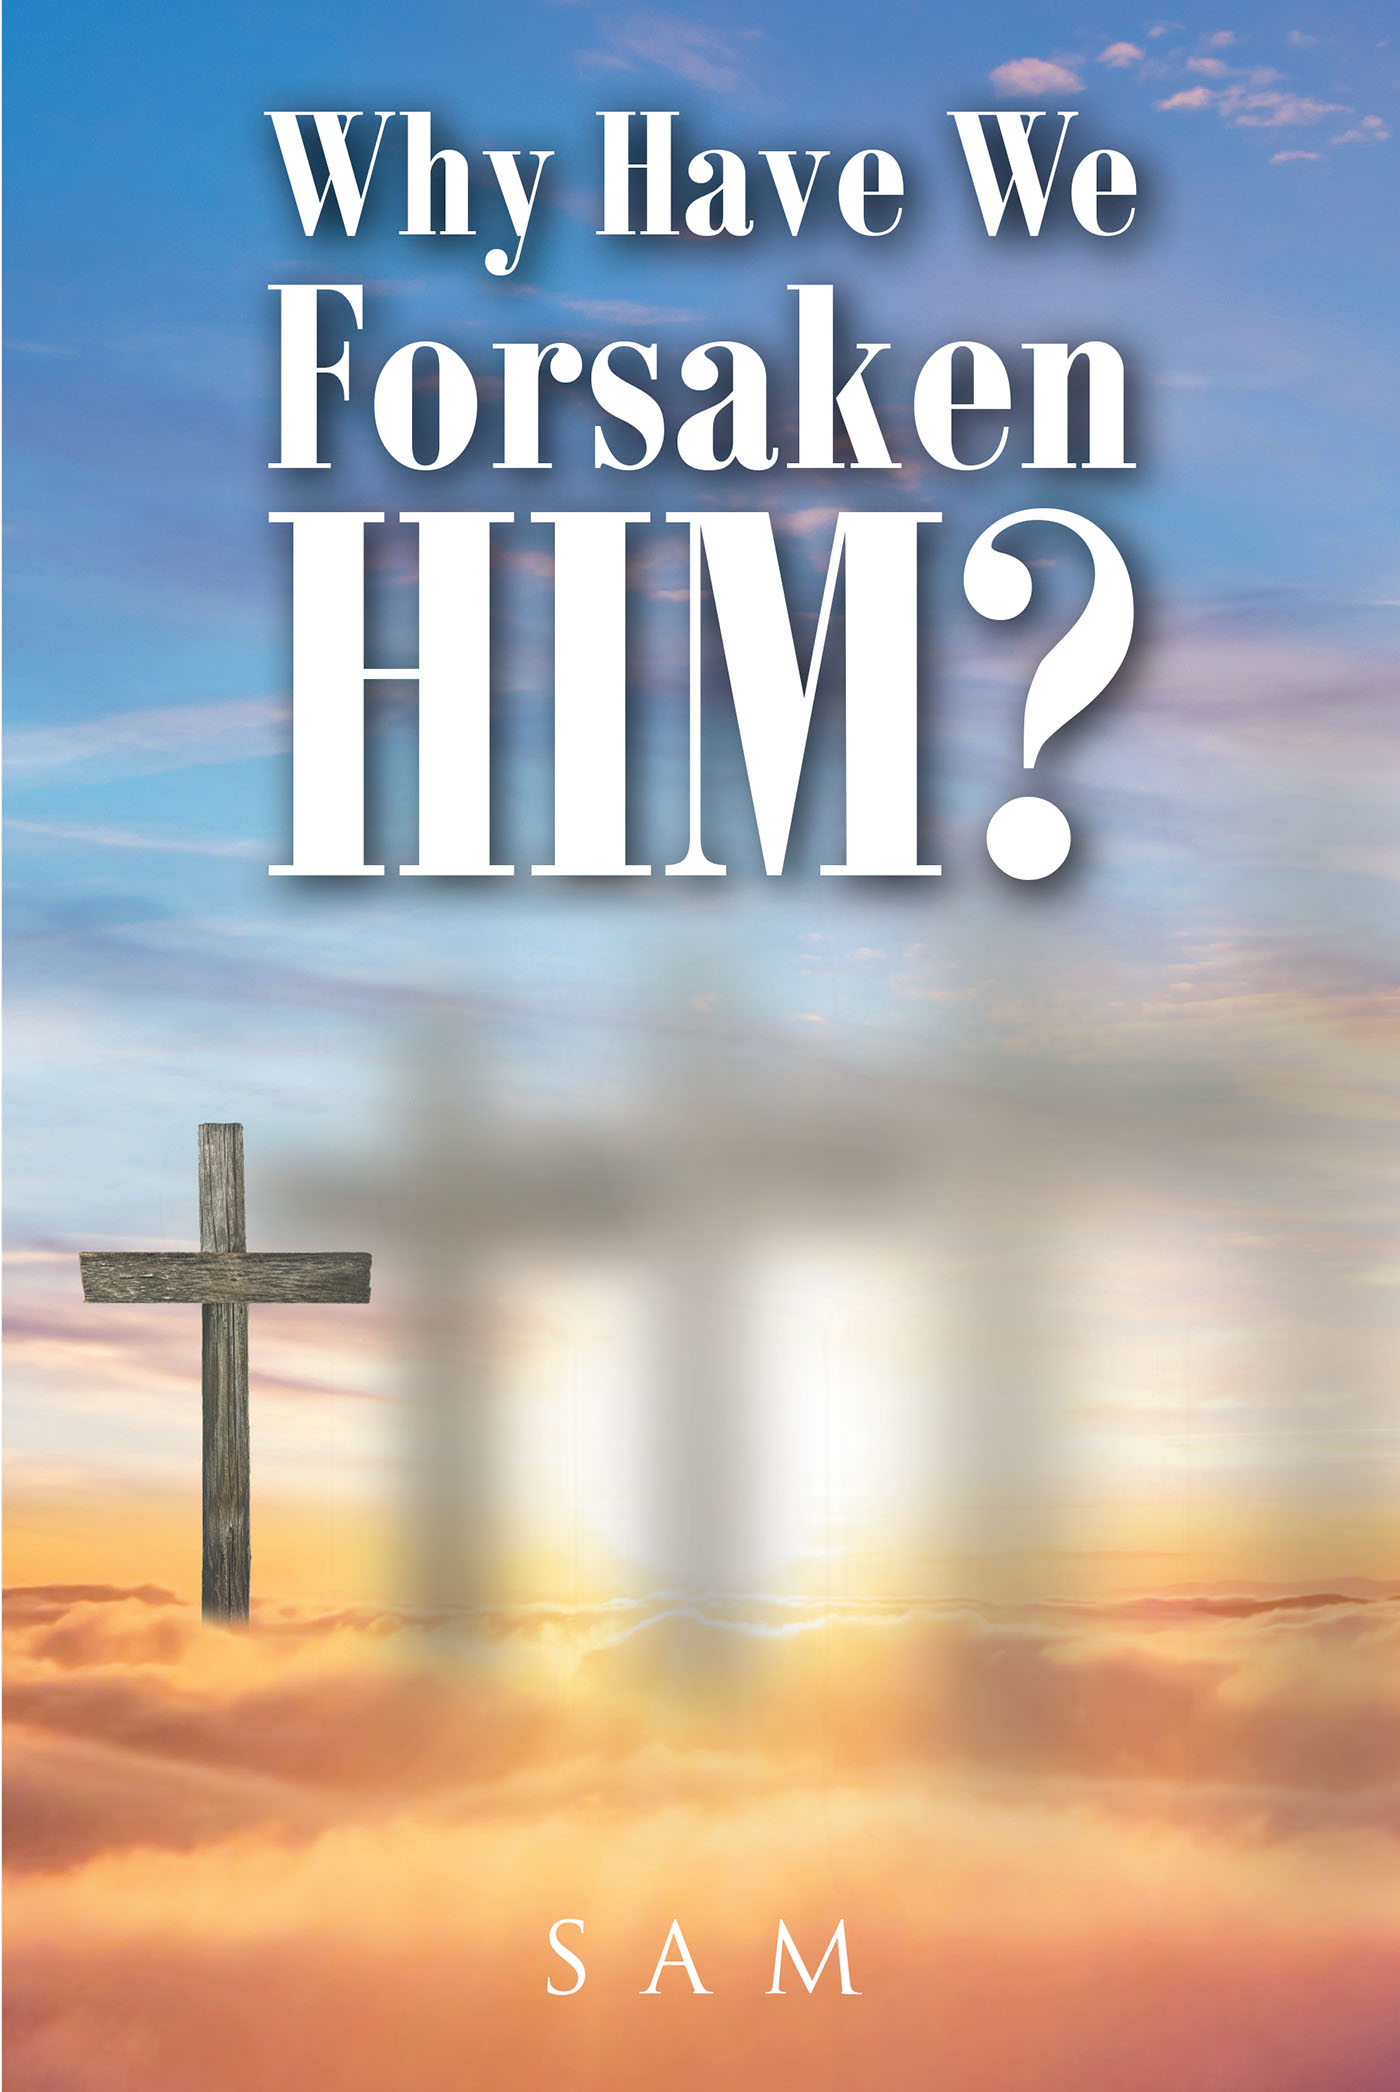 Sam’s Newly Released "Why Have We Forsaken Him?" Is a Message of Hope for Renewed Faith and Celebration of God